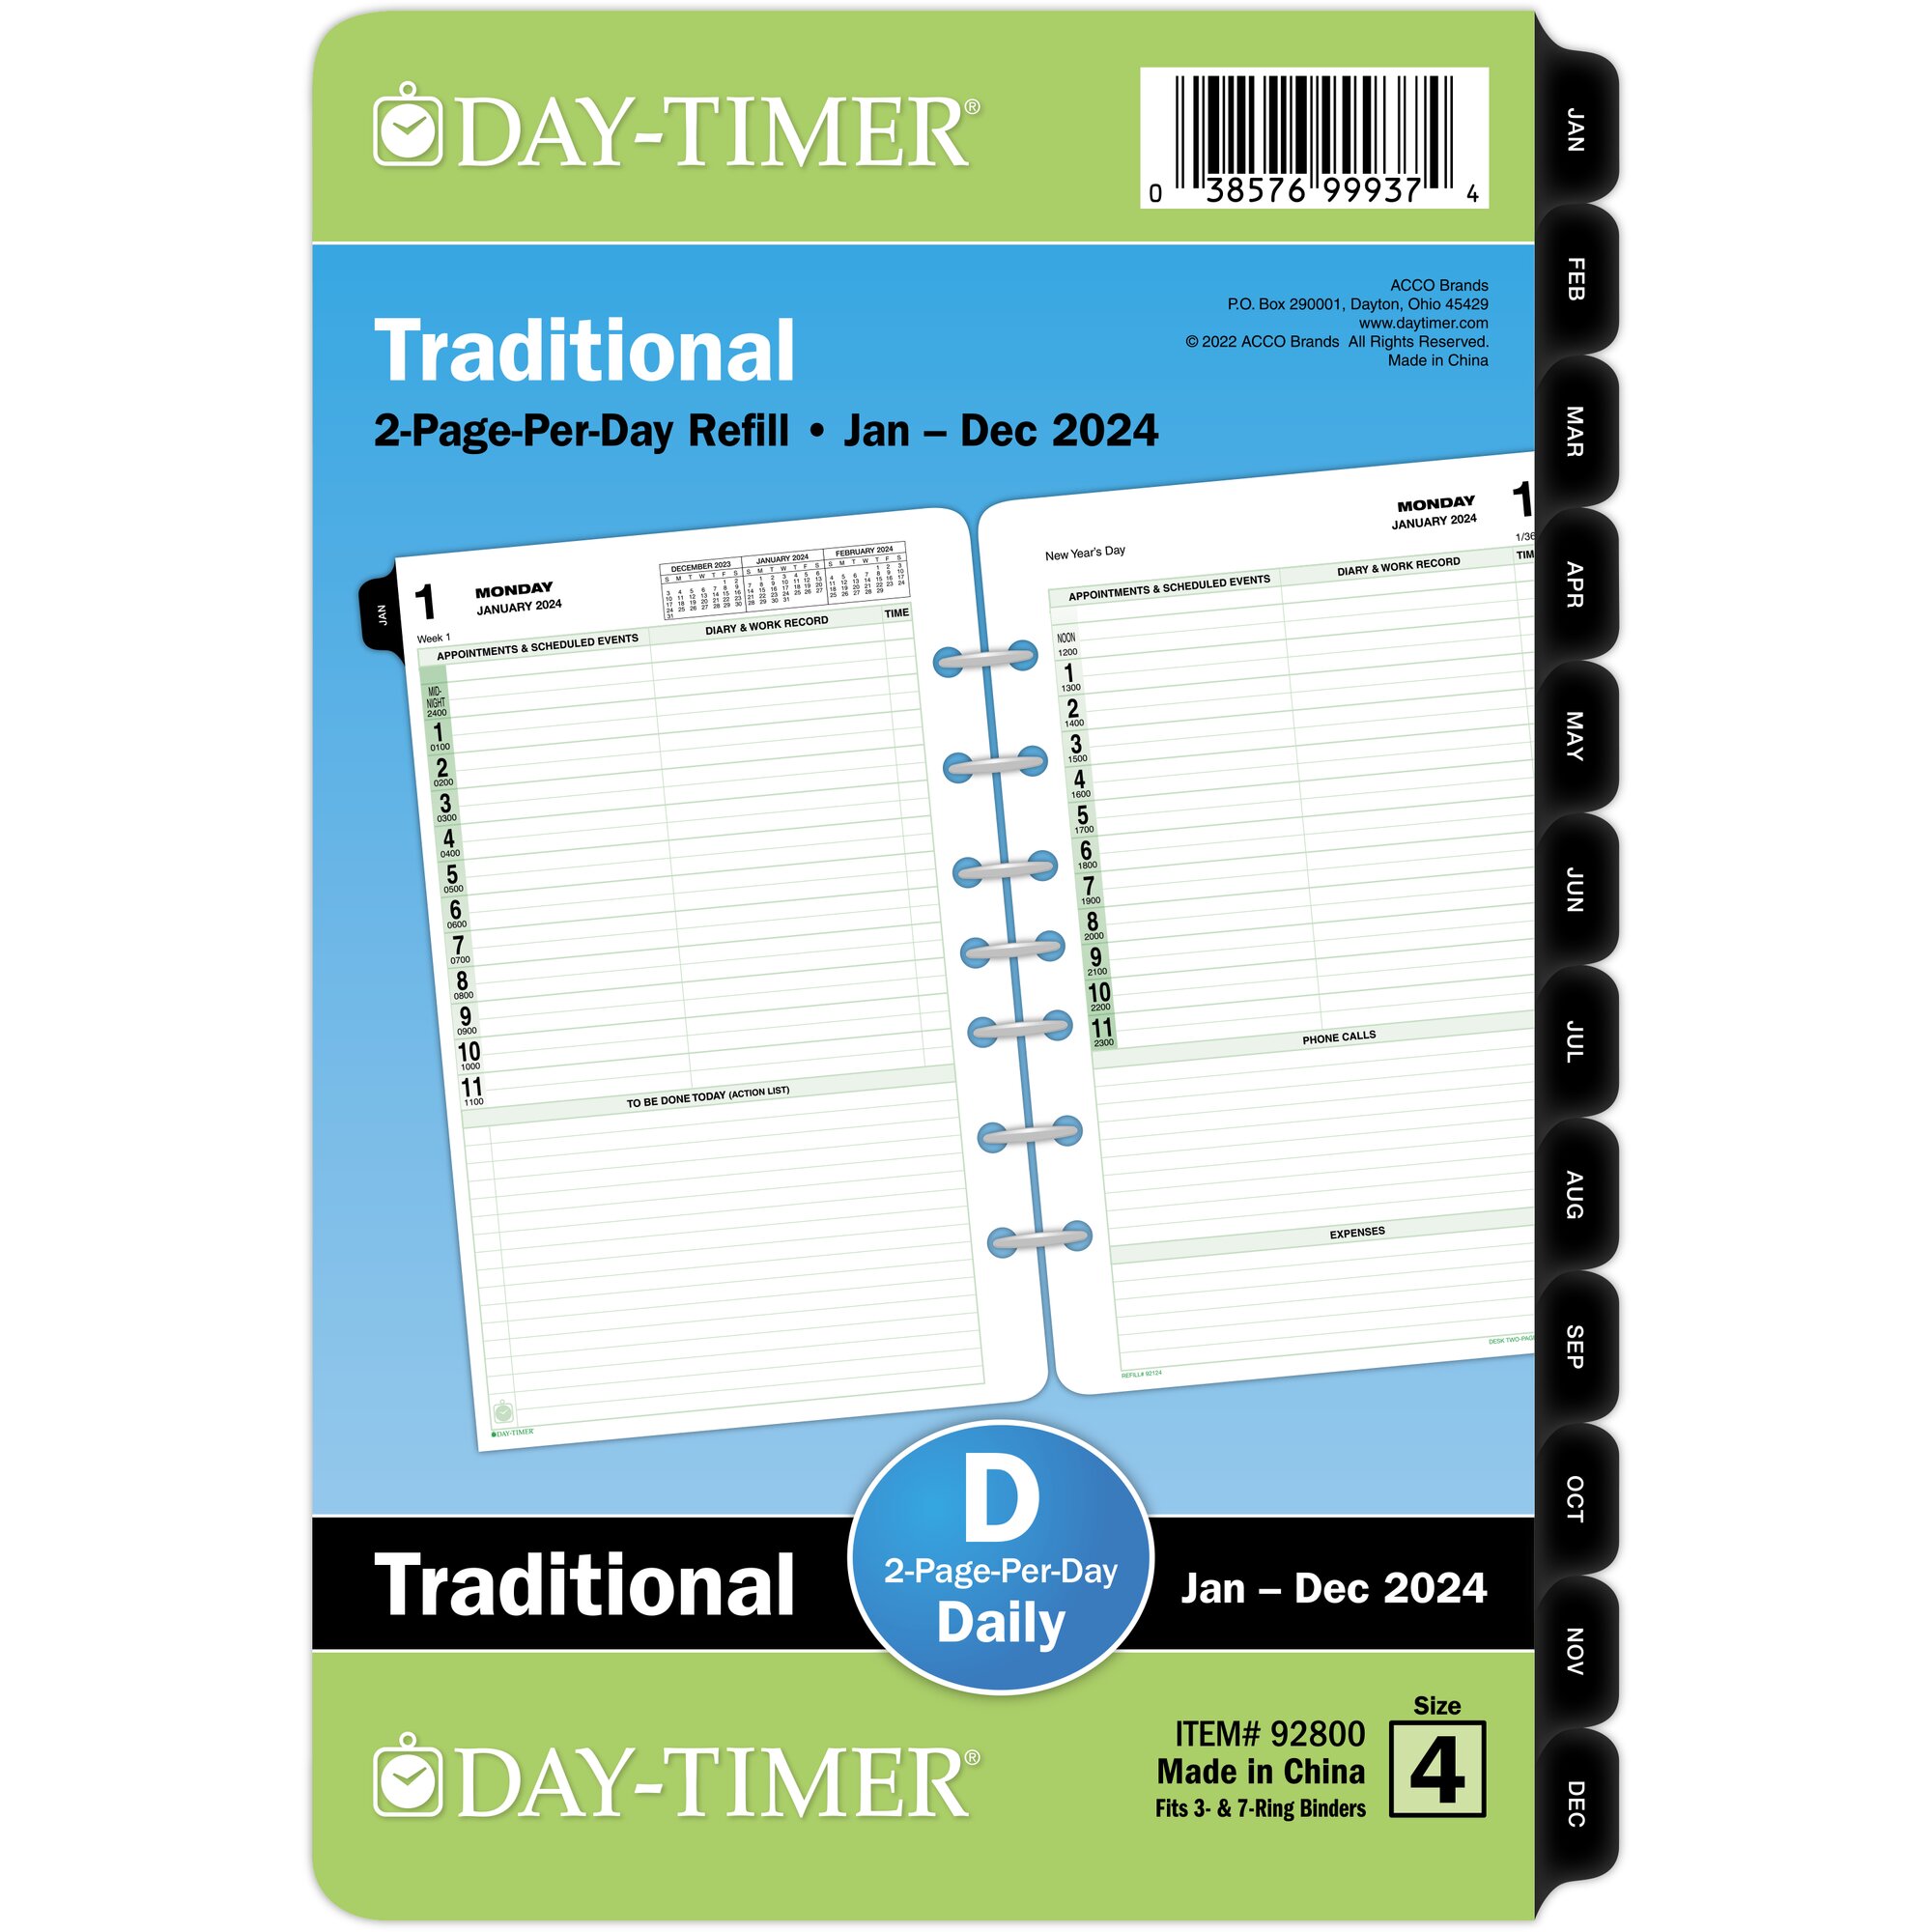 DAYTIMER 24HOUR JANUARY 2024 December 2024 Two Page Per Day Planner